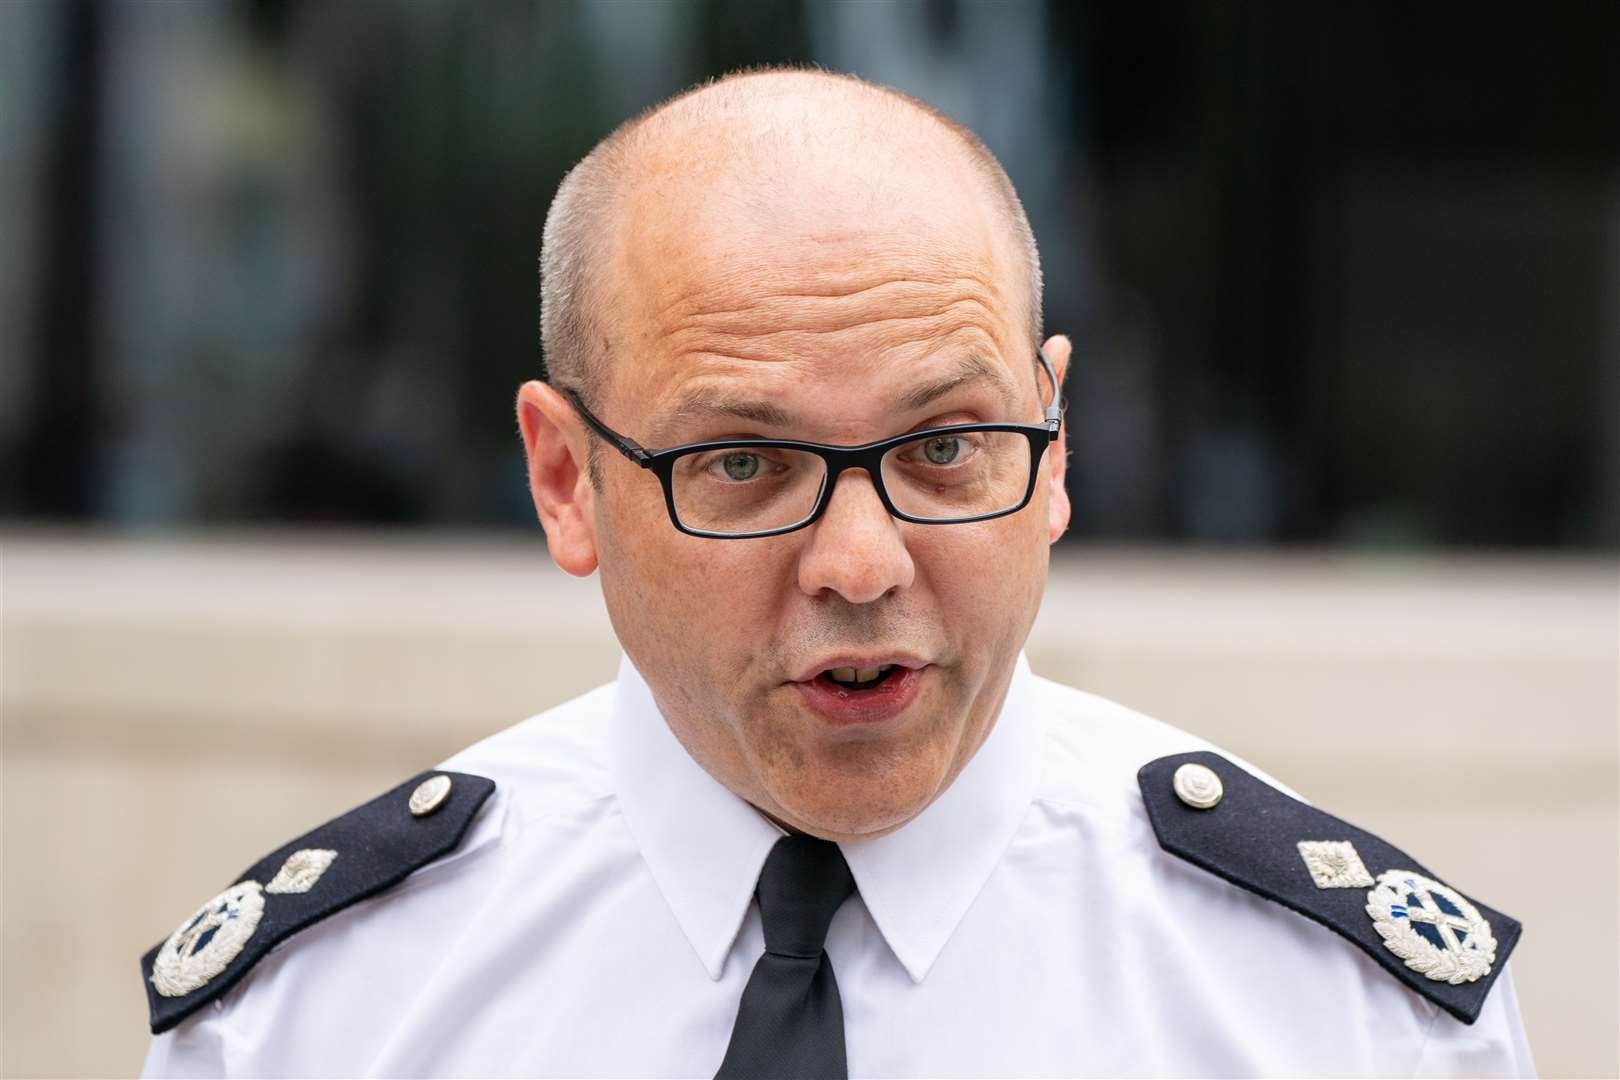 Metropolitan Police Assistant Commissioner Matt Twist said policing the protests since October has cost more than £5 million. (Dominic Lipinski/PA)